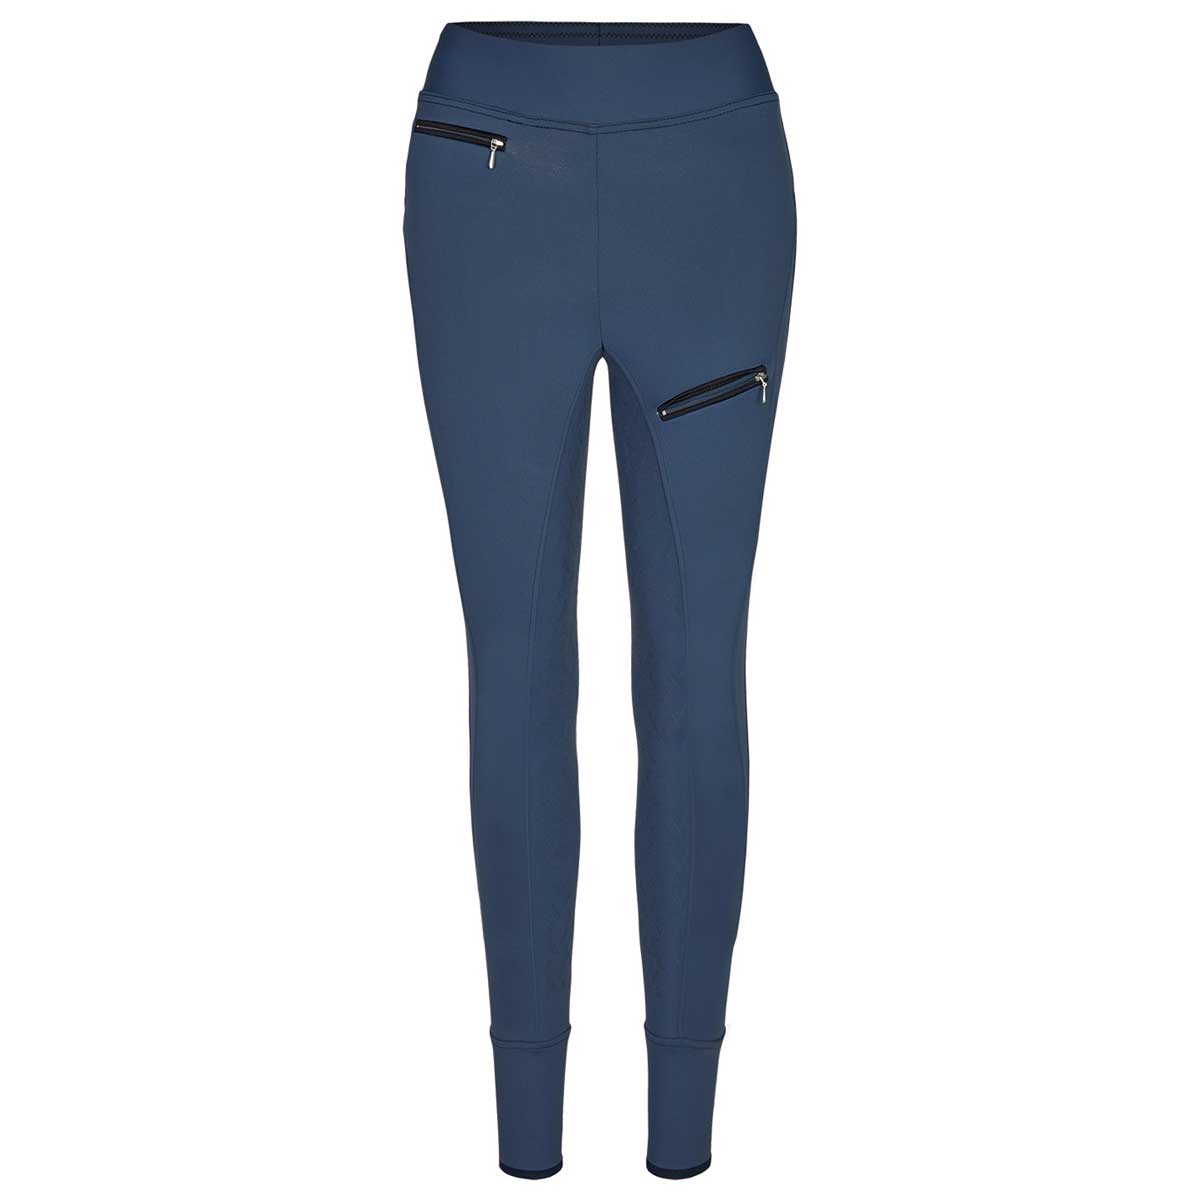 BUSSE Riding leggings PERFECT-FIT Teens navy 146